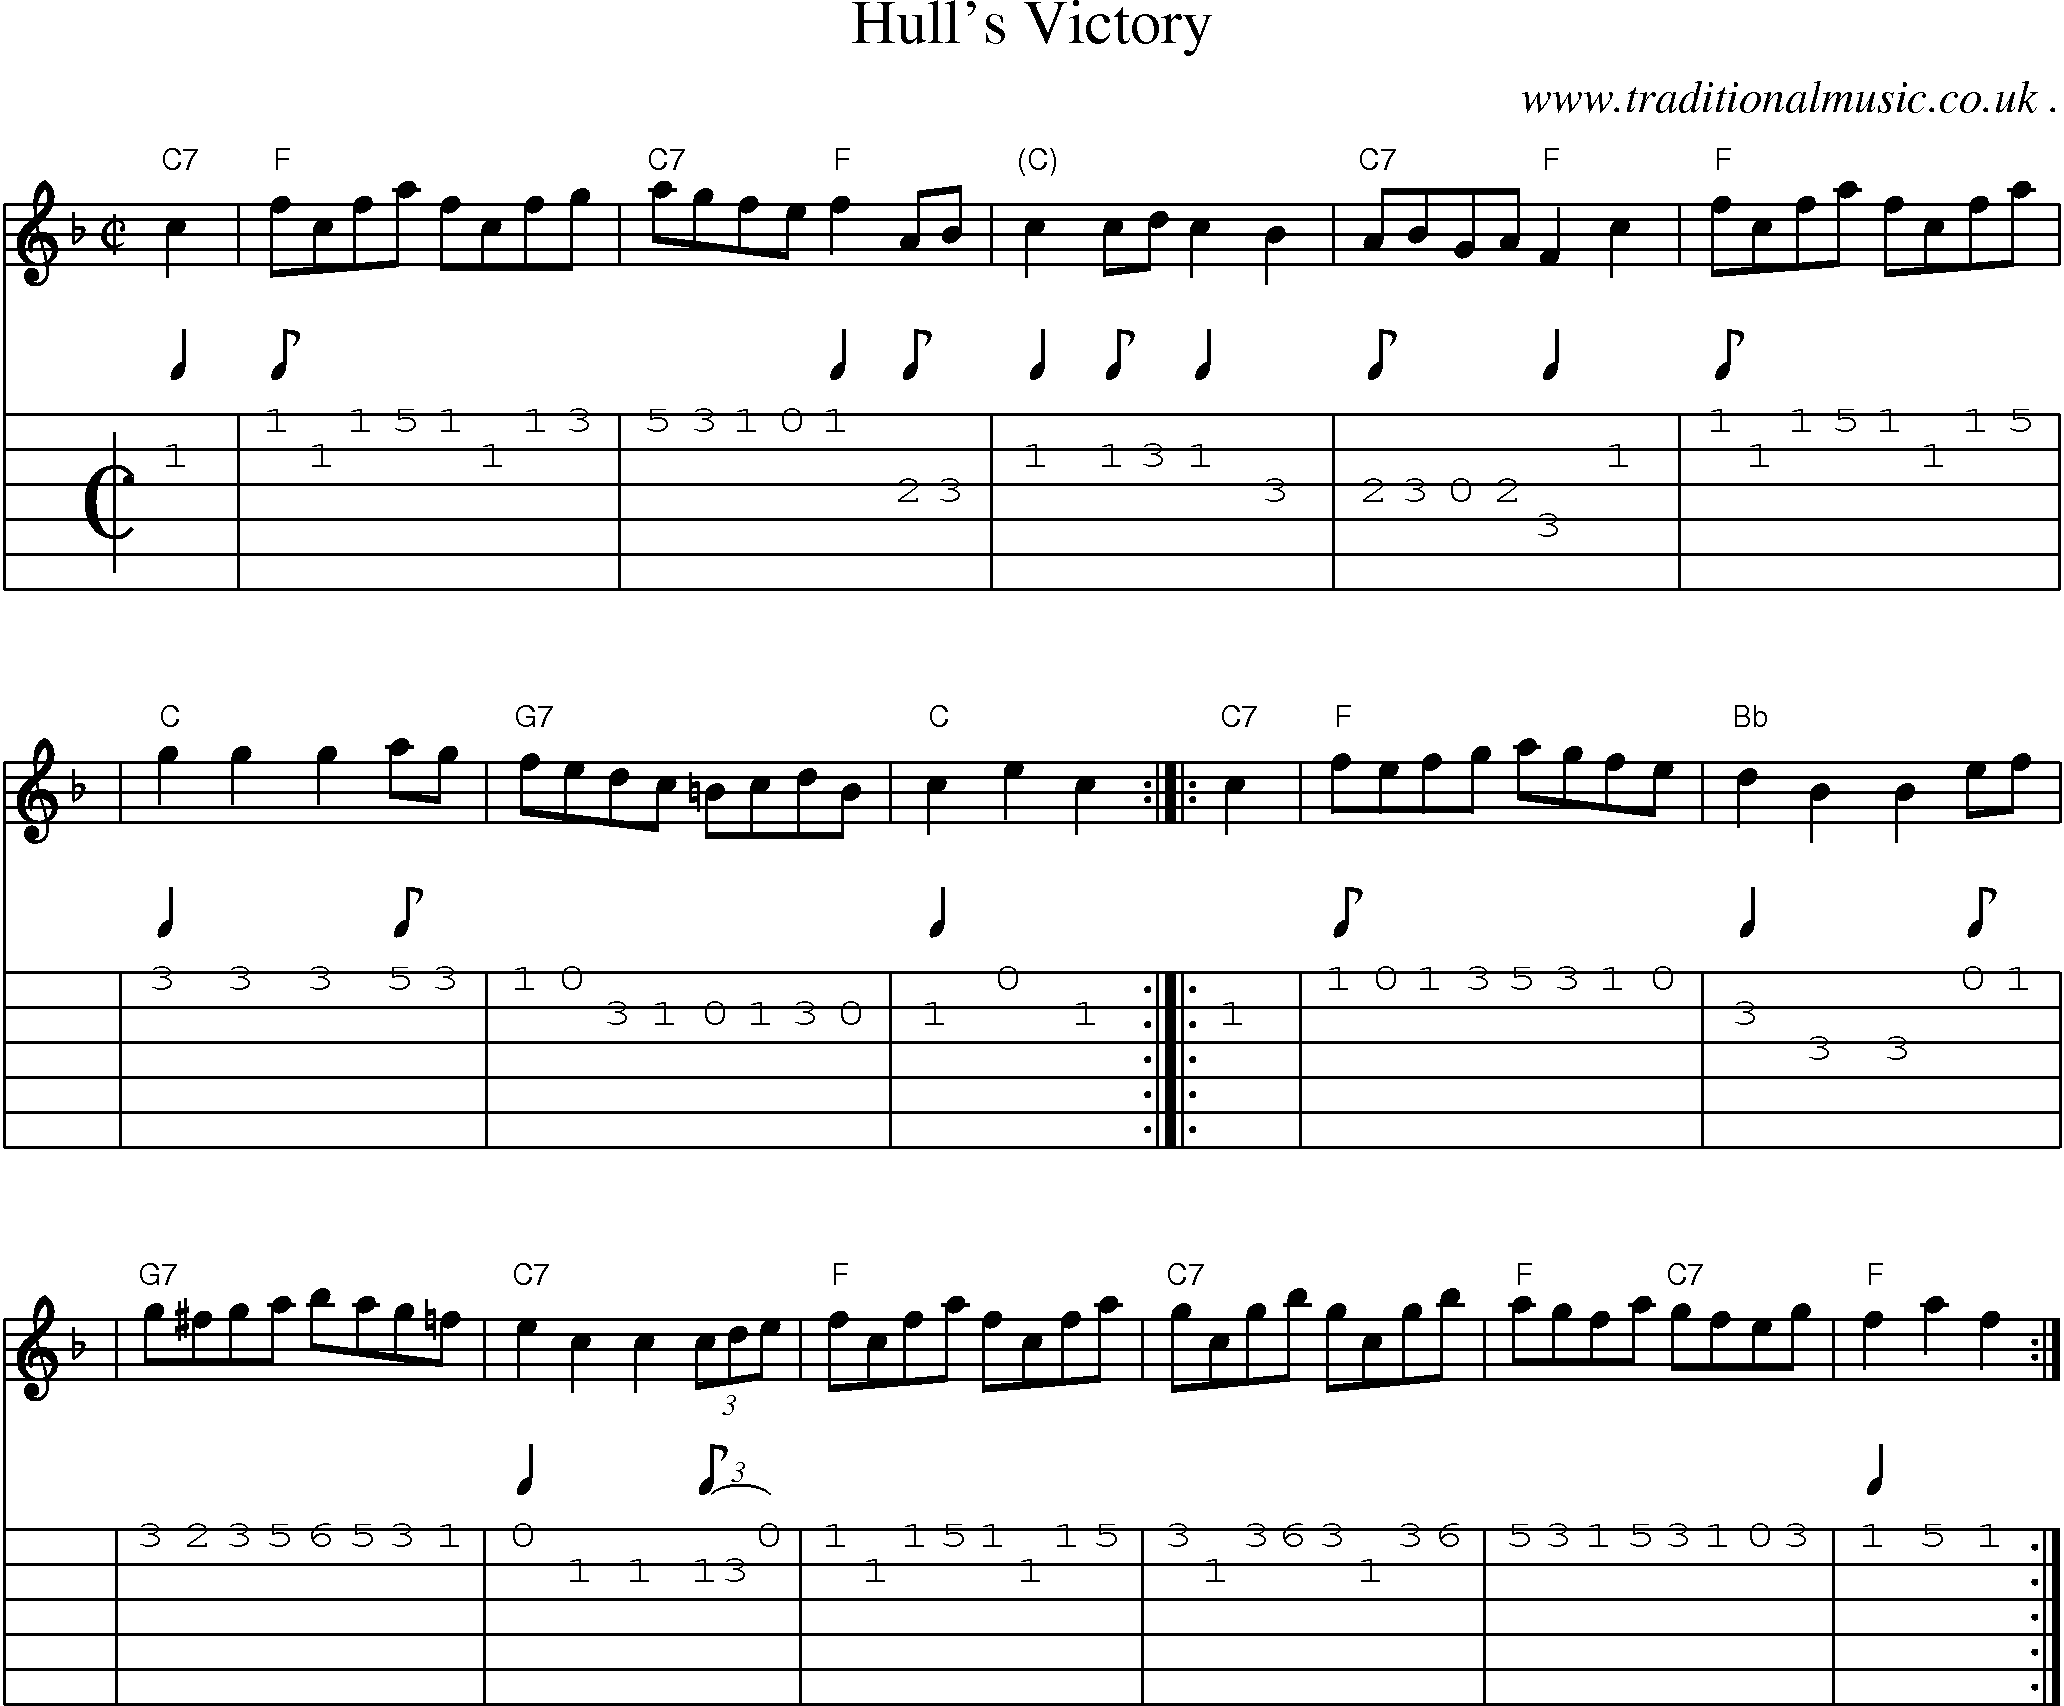 Sheet-music  score, Chords and Guitar Tabs for Hulls Victory